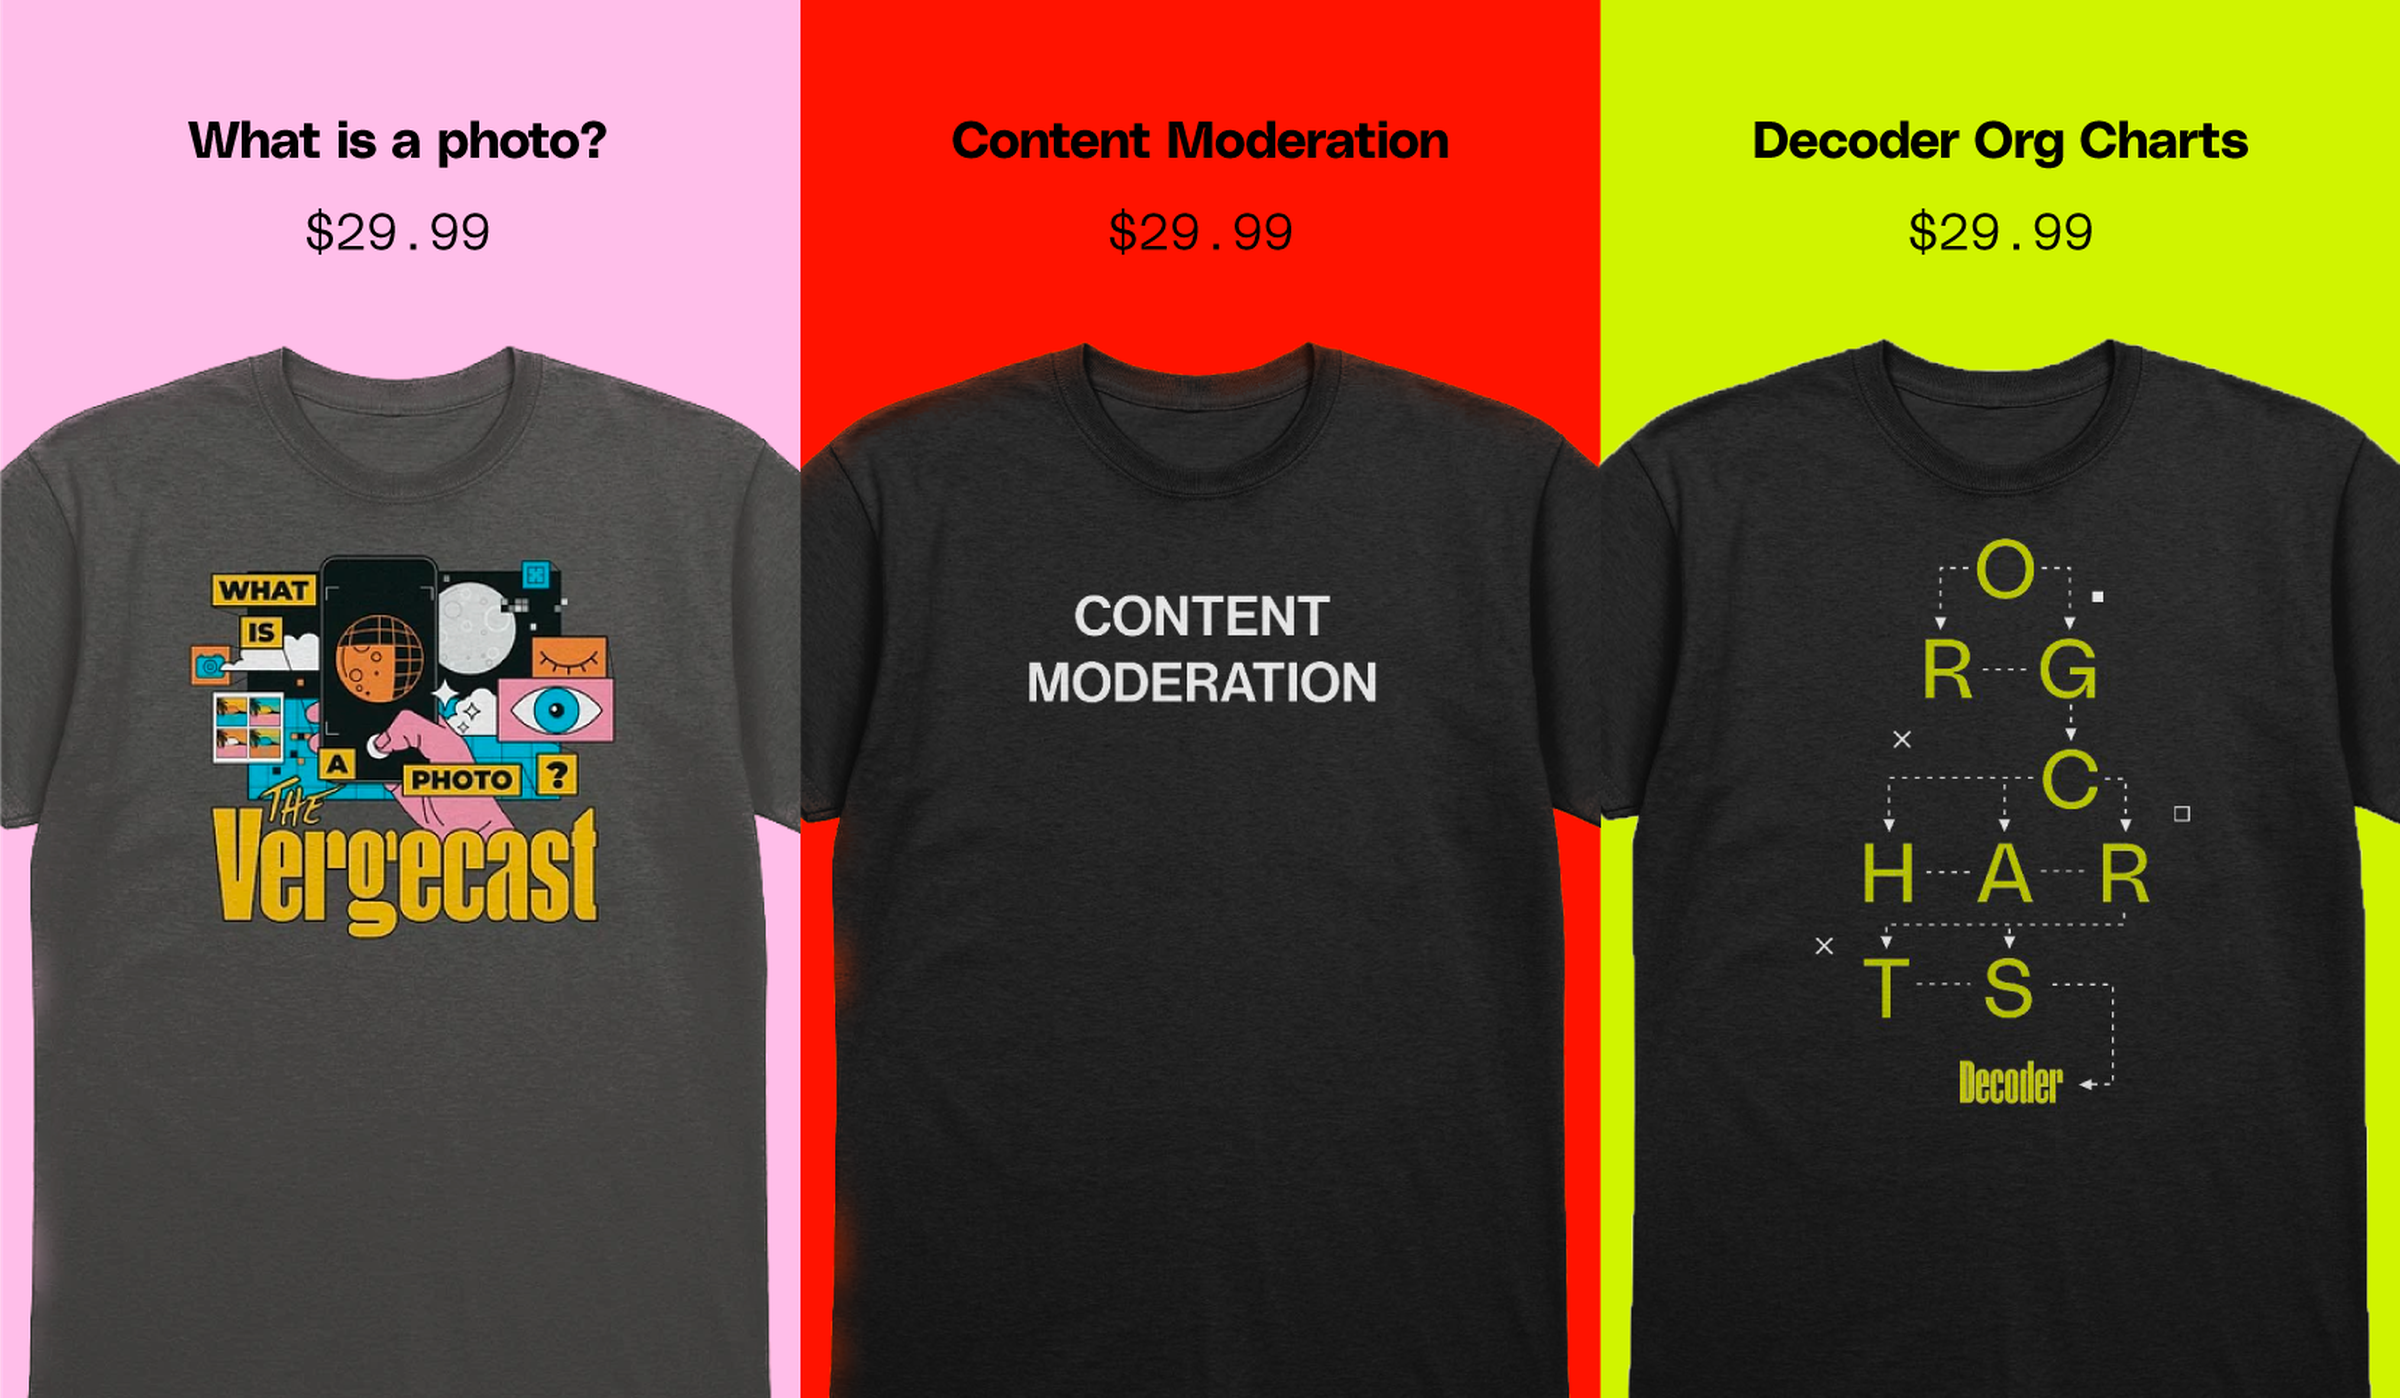 Three new shirts from The Verge: Decoder Org Charts, Content Moderation, and “What is a photo?” priced at $29.99 each